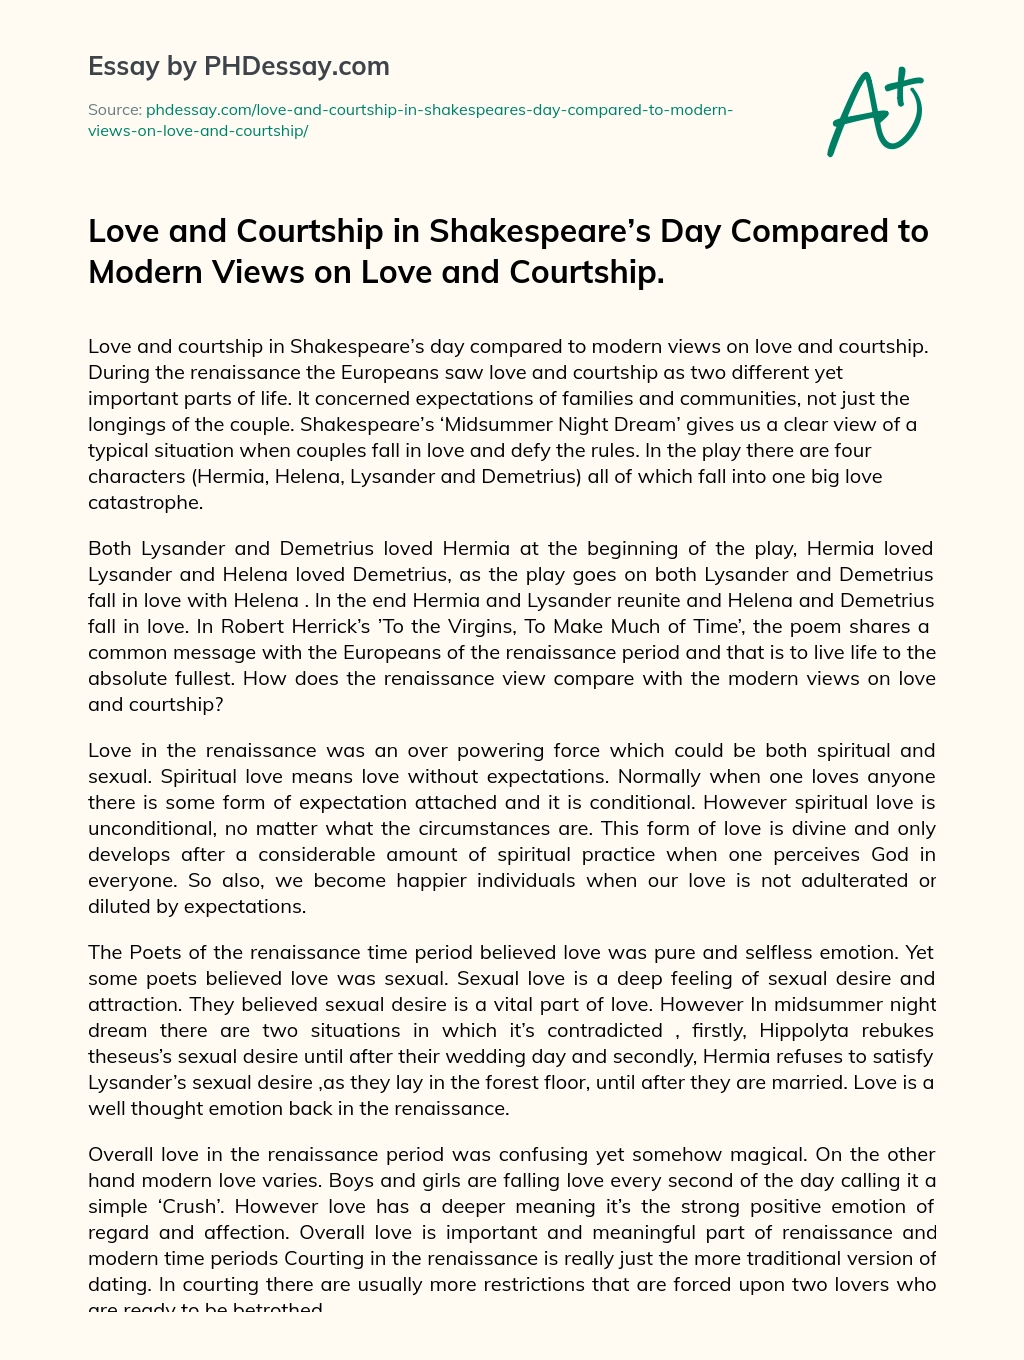 Love and Courtship in Shakespeare’s Day Compared to Modern Views on Love and Courtship. essay